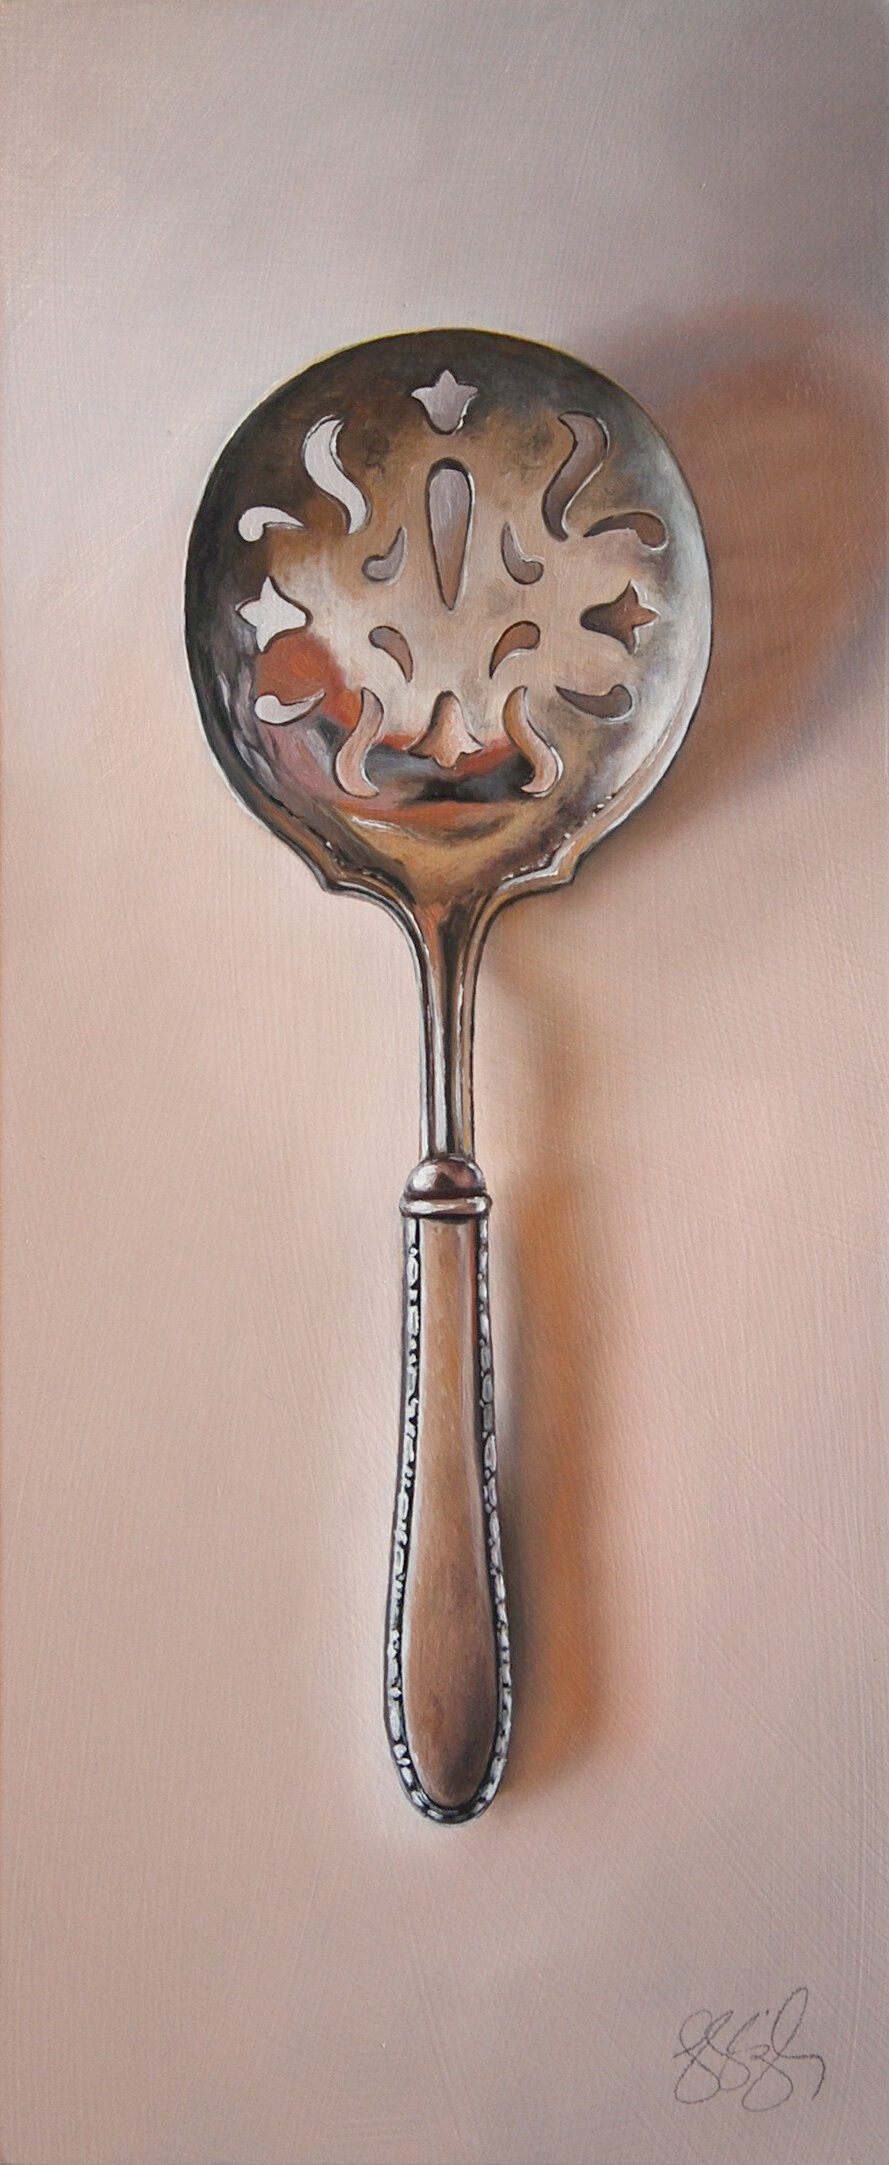   Silver Spoon #133, The Mainstay  Oil on panel, 2018. 12x5” 